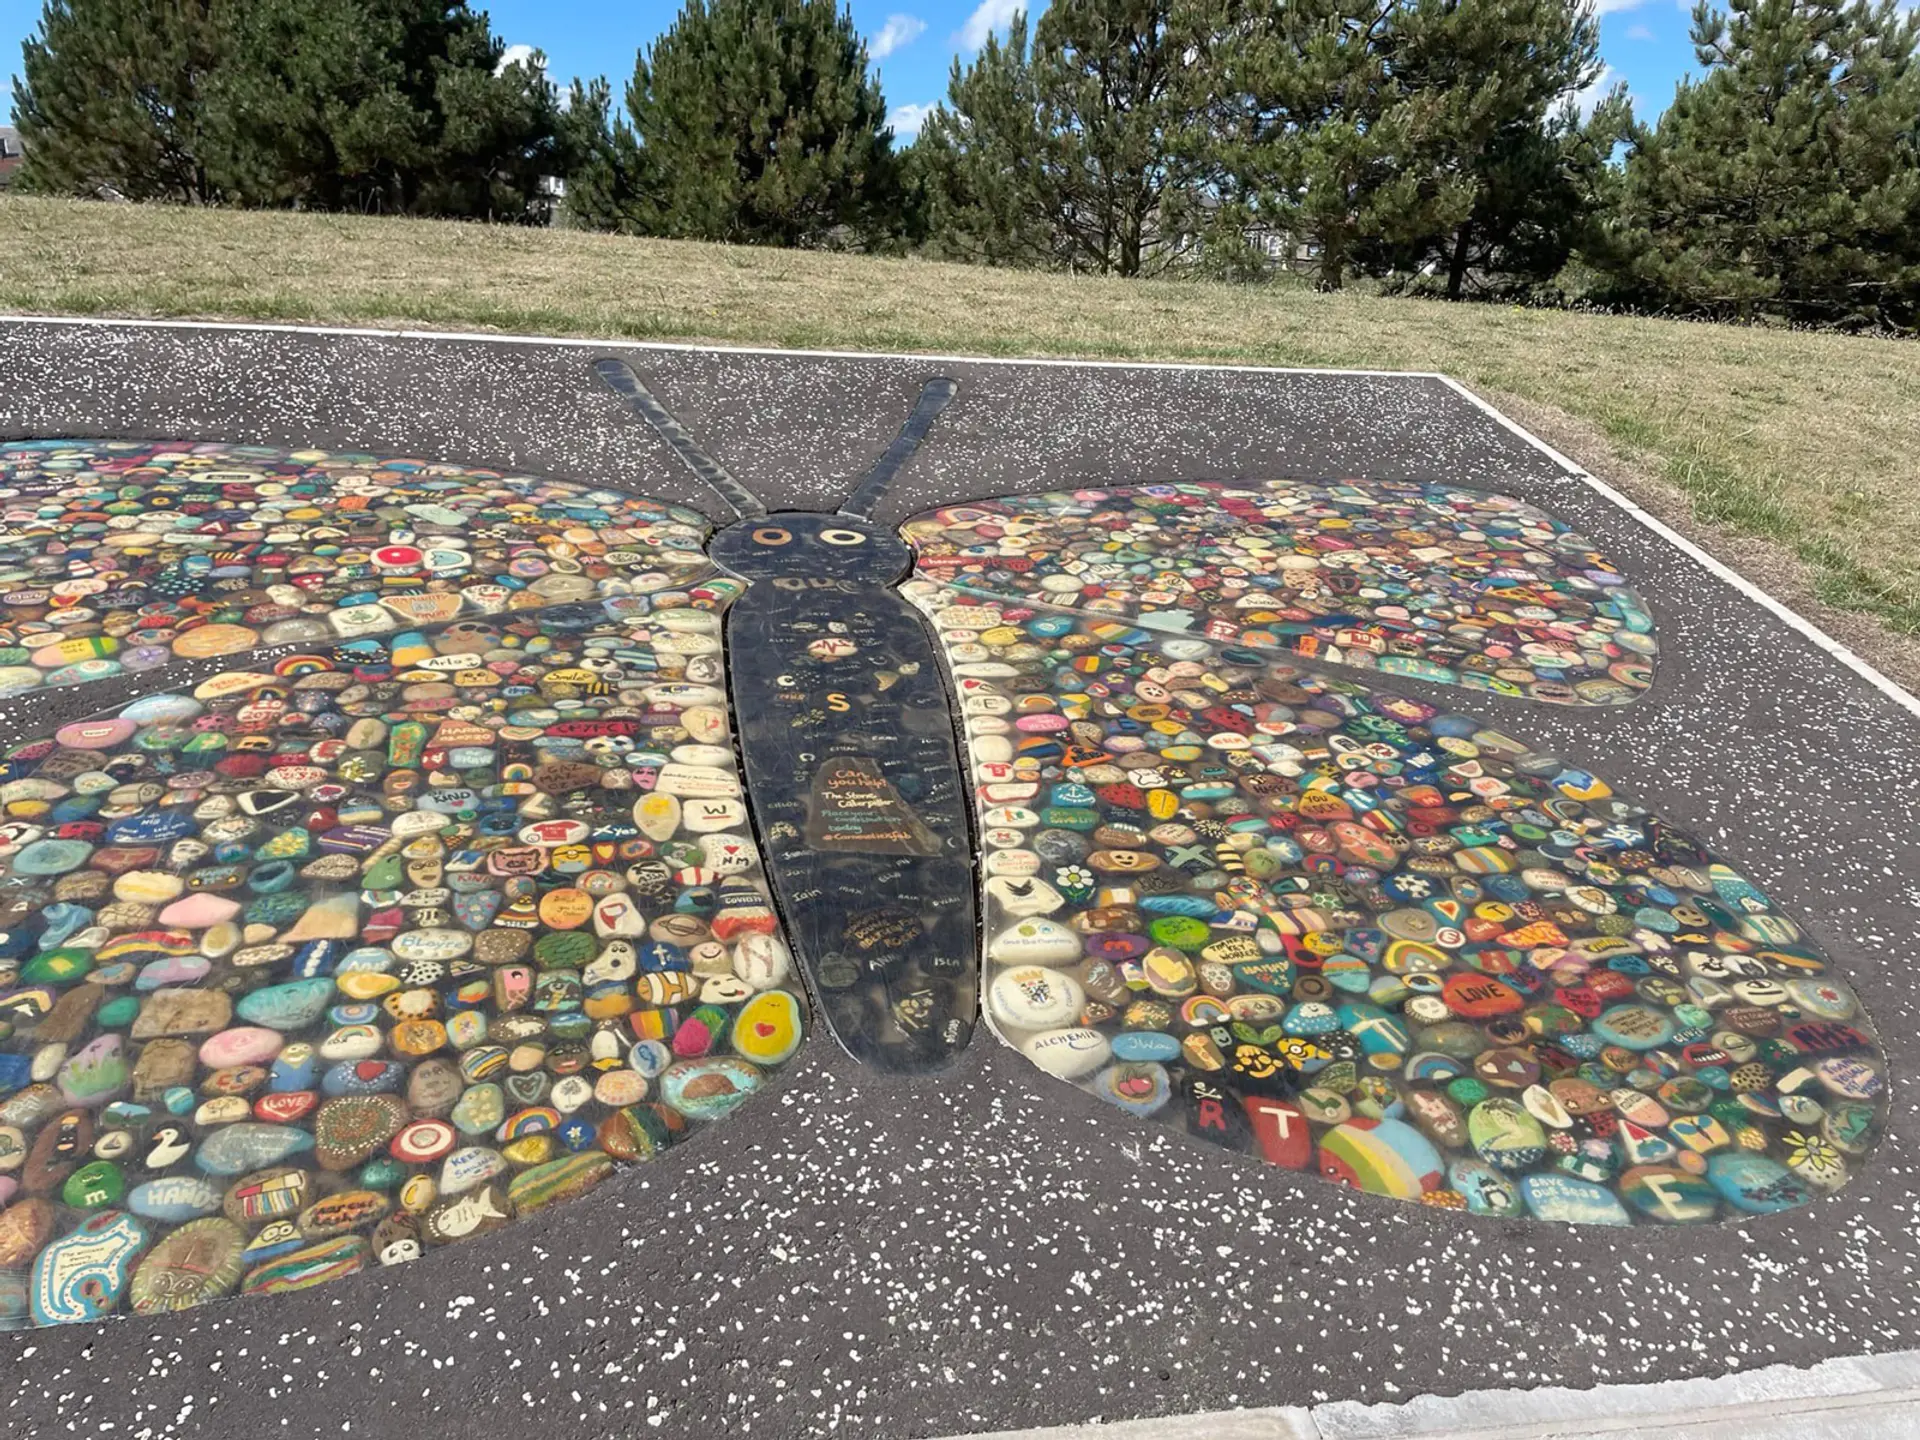 A large butterfly has been created in a tarmac surround using pebbles painted by the local community during the pandemic. The wings of the butterfly are colourful and the body, head and antennae are coloured black. Around the tarmac is green grass and trees.